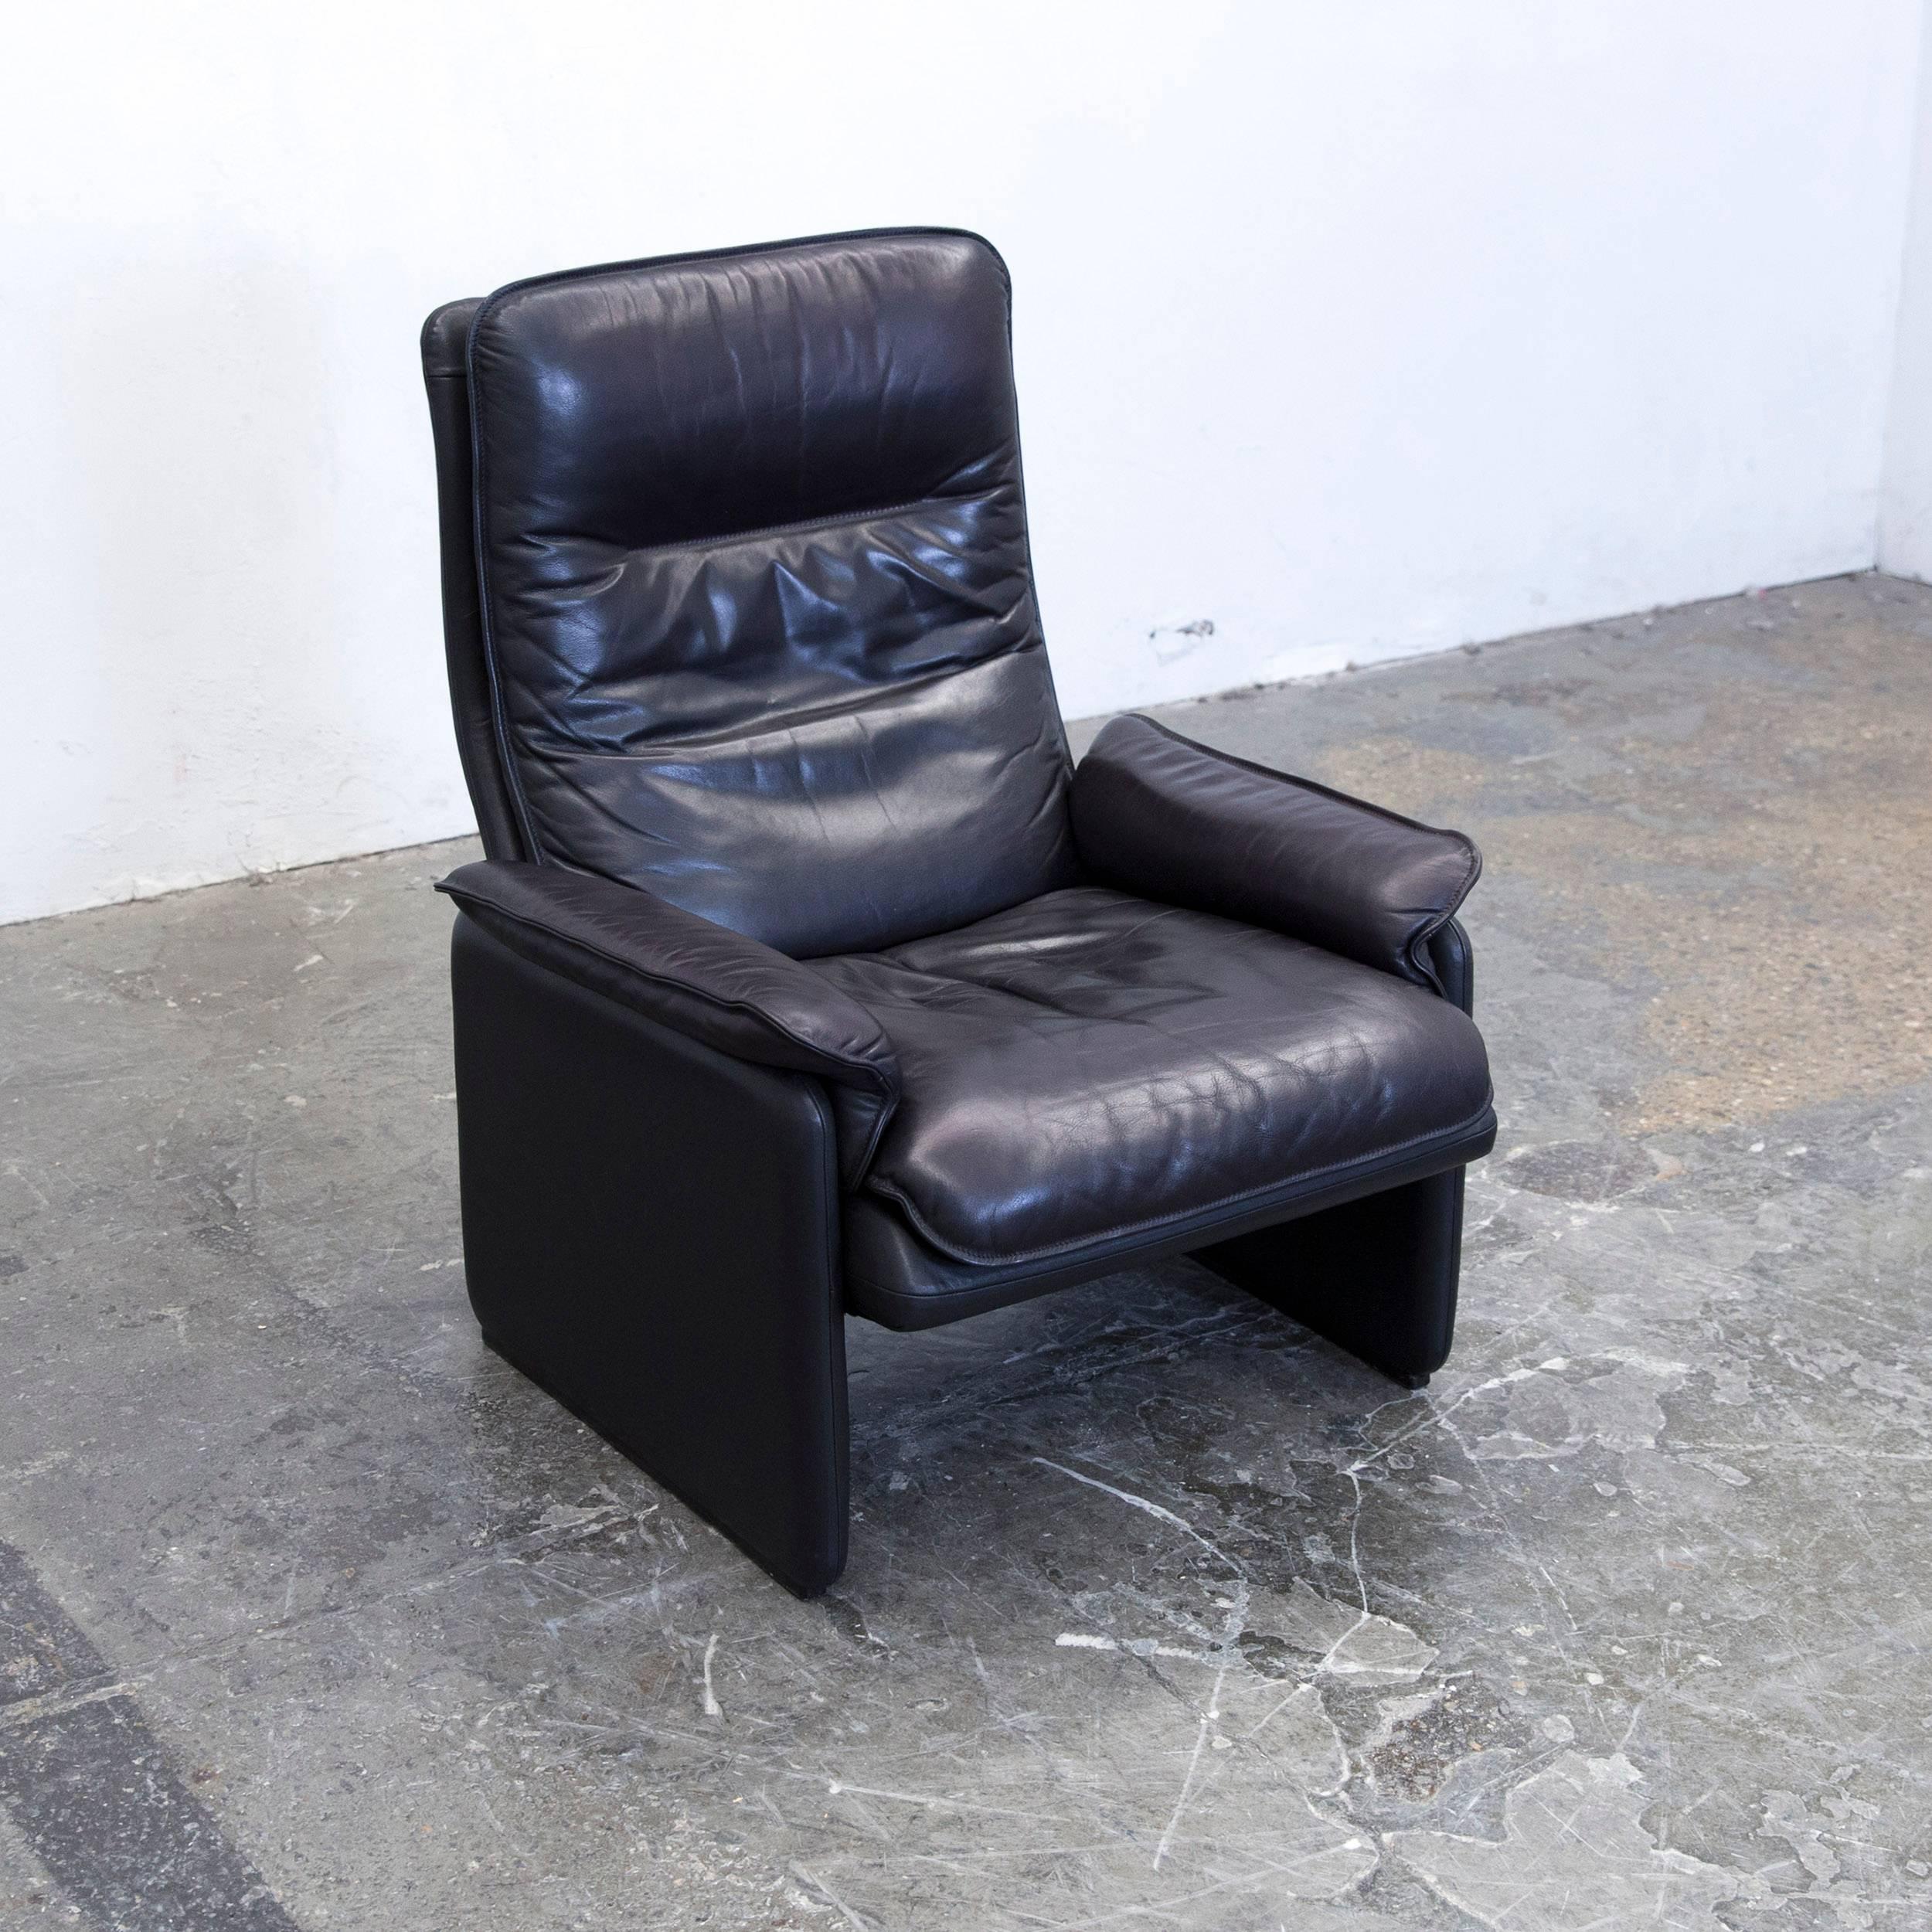 Aubergine black colored original de Sede designer leather armchair, in a minimalistic and modern design, with a convenient relax function, made for pure comfort.